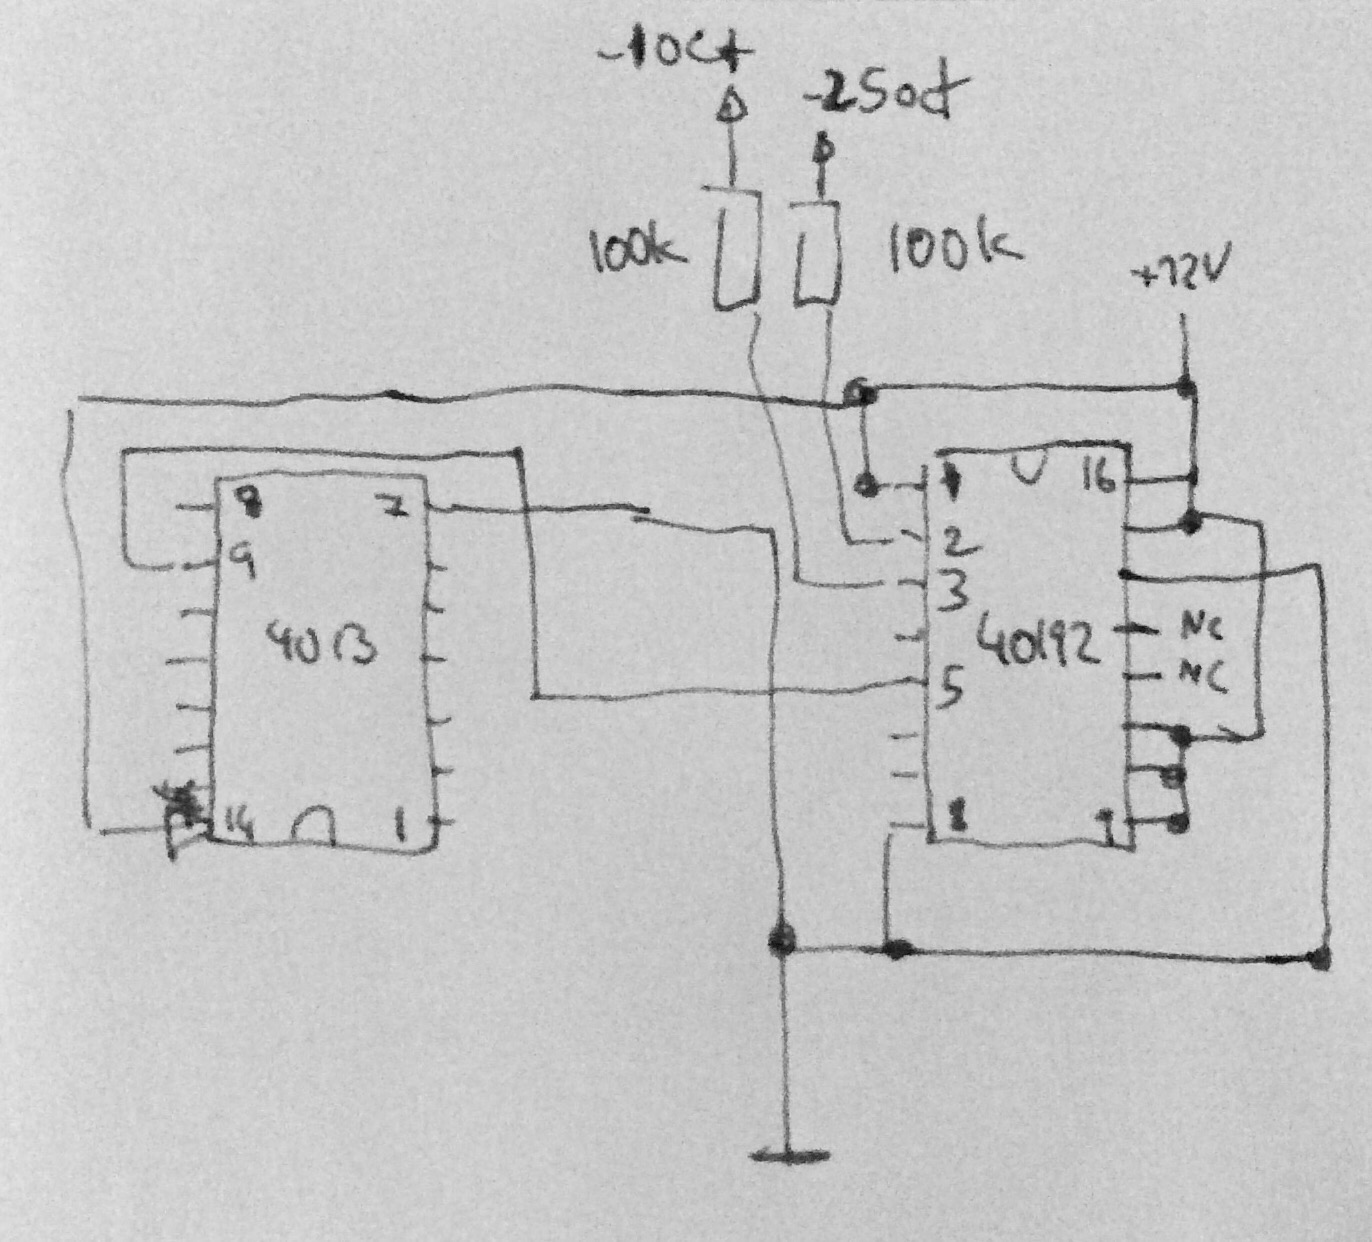 Circuit diagram with 40192